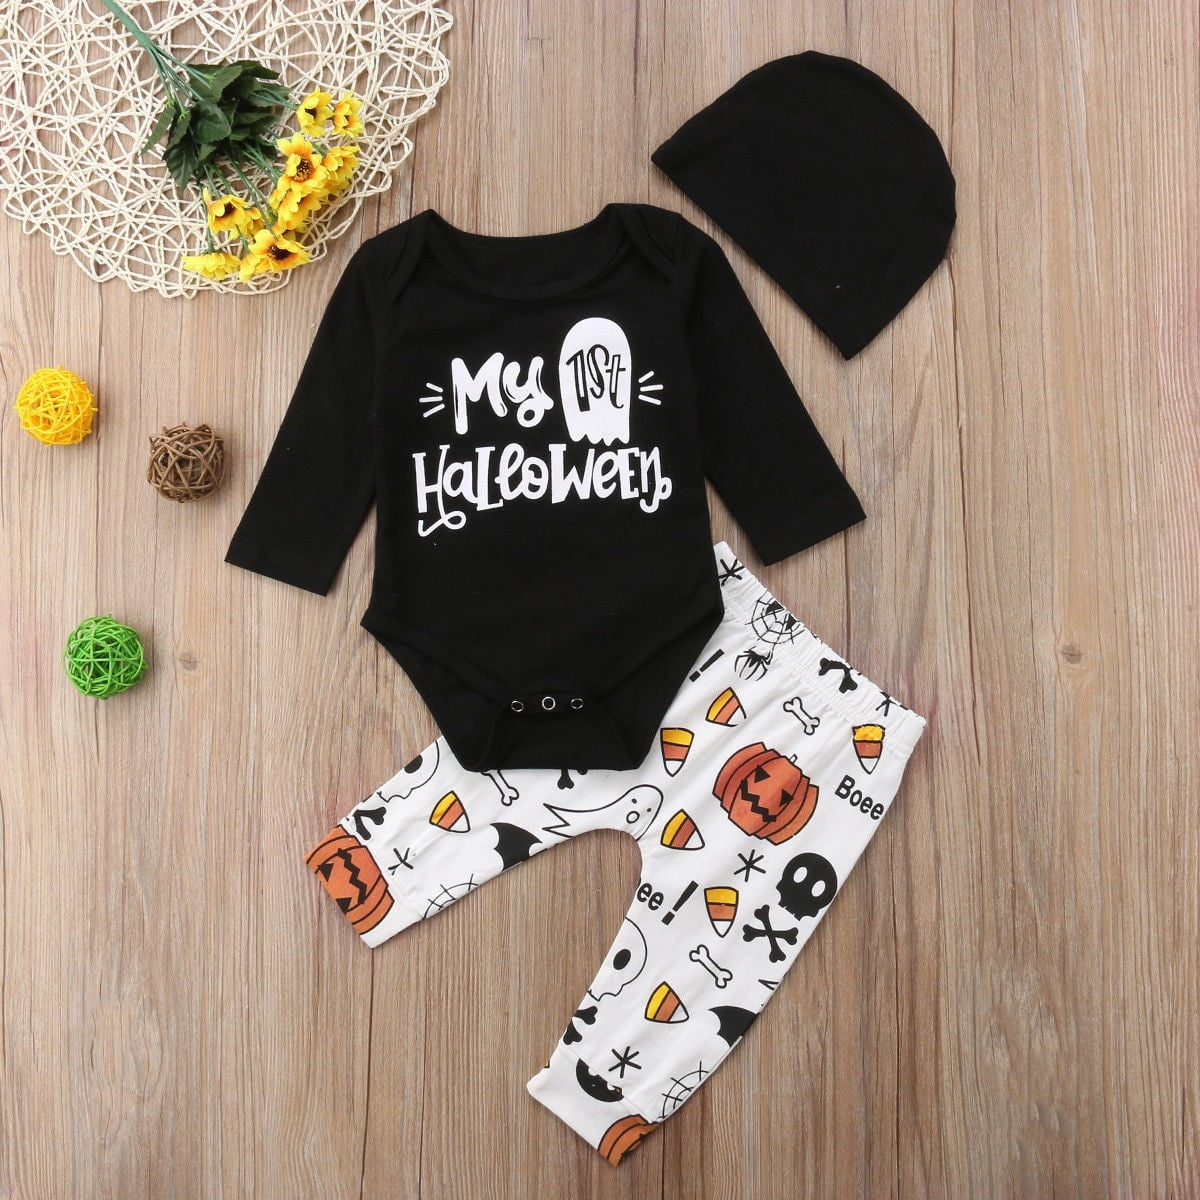 Lucoo Toddler Newborn Baby Boys Girls Halloween Cosplay Costume Romper Hat Outfits Set 